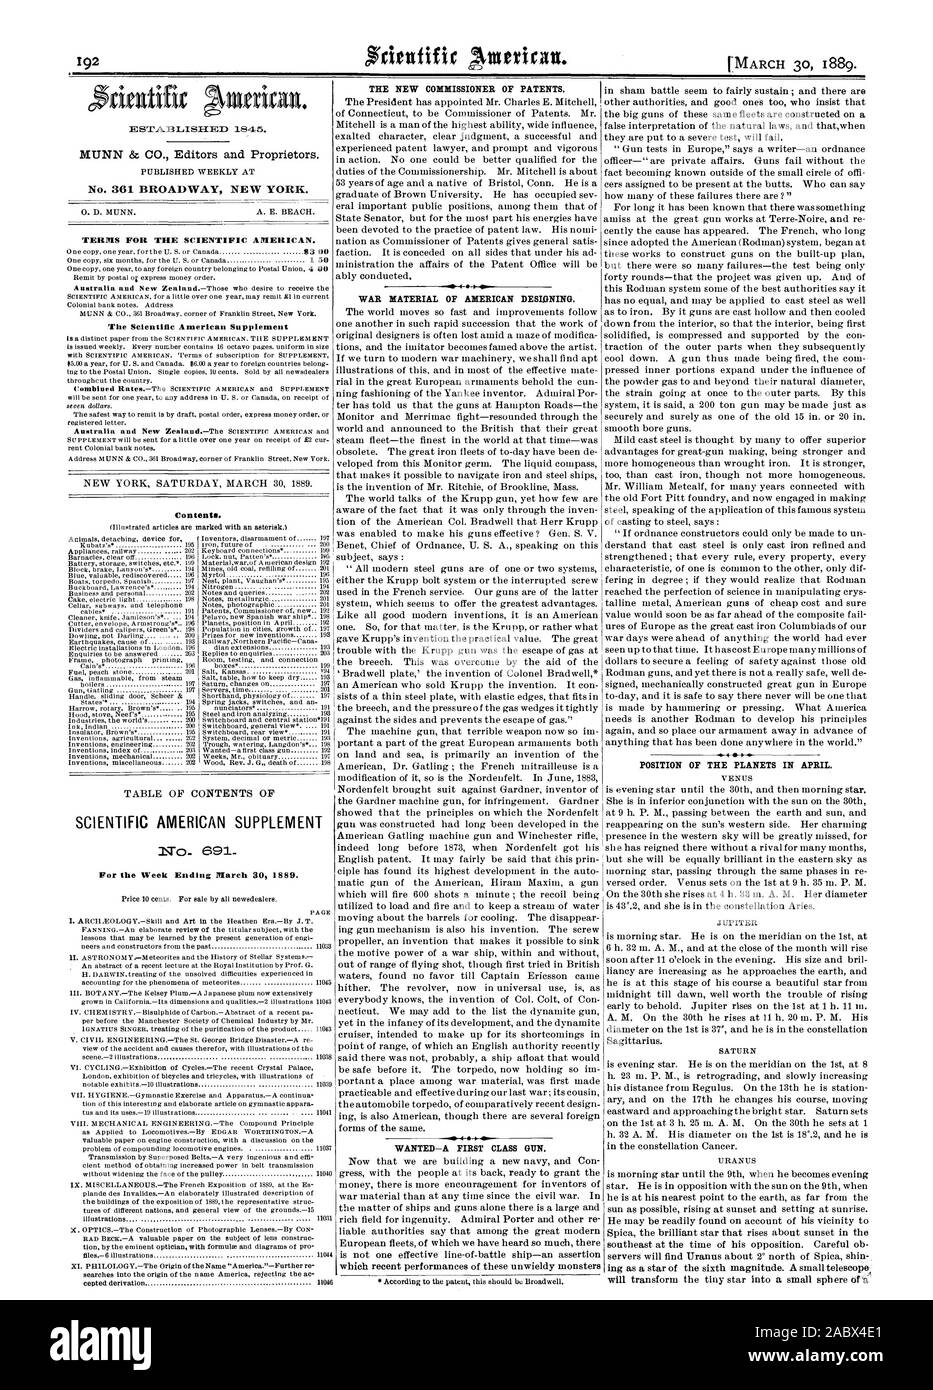 Week Ending March 30 1889. Price 10 cents. For sale by all newsdealers. PAGE I. ARCHAEOLOGYSkill and Art in the Heathen EraBy J. T. FANNINGAn elaborate review of the titular subject with the II. ASTRONOMY.Meteorites and the History of Stellar Systems An abstract of a recent lecture at the Royal Institution by Prof. G. II. DARwINtreating of the unsolved difficulties experienced in . BOTANYThe Kelsey PlumA Japanese plum now extensively grown in California—Its dimensions and qualities.-2 illustrations 043 per before the Manchester Society of Chemical Industry by Mr IGNATIUS SINGER treating of the Stock Photo